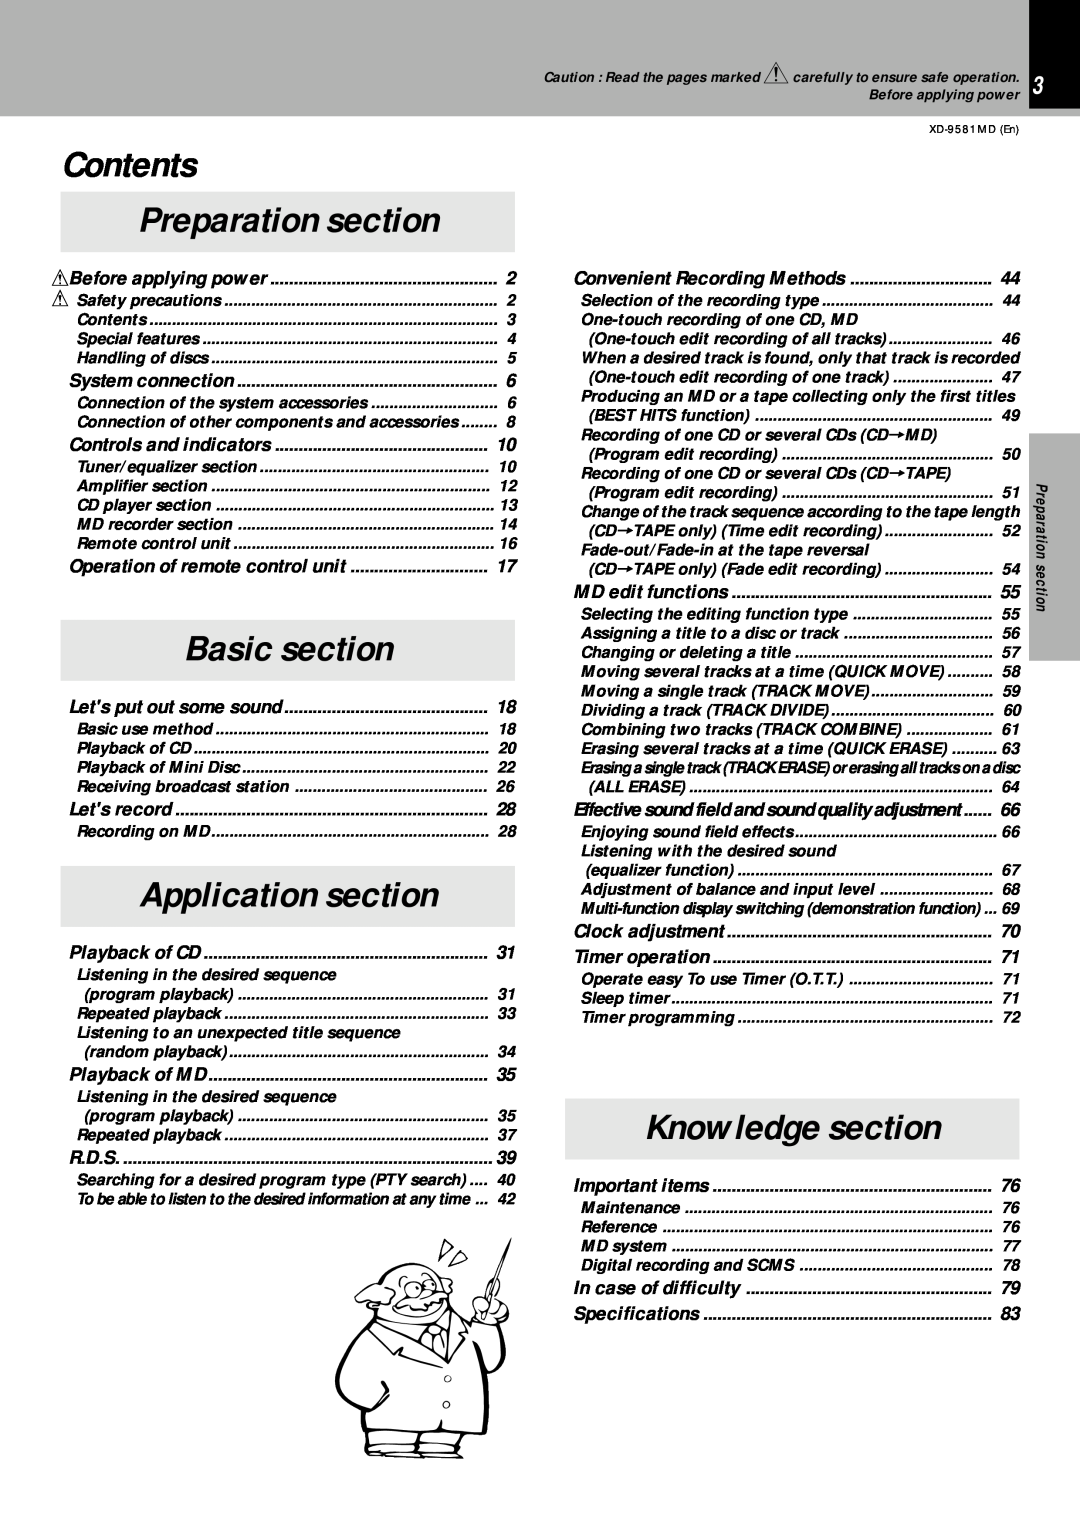 Kenwood XD-9581MD Contents, Knowledge section, Preparation section, Application section, Important items, Specifications 